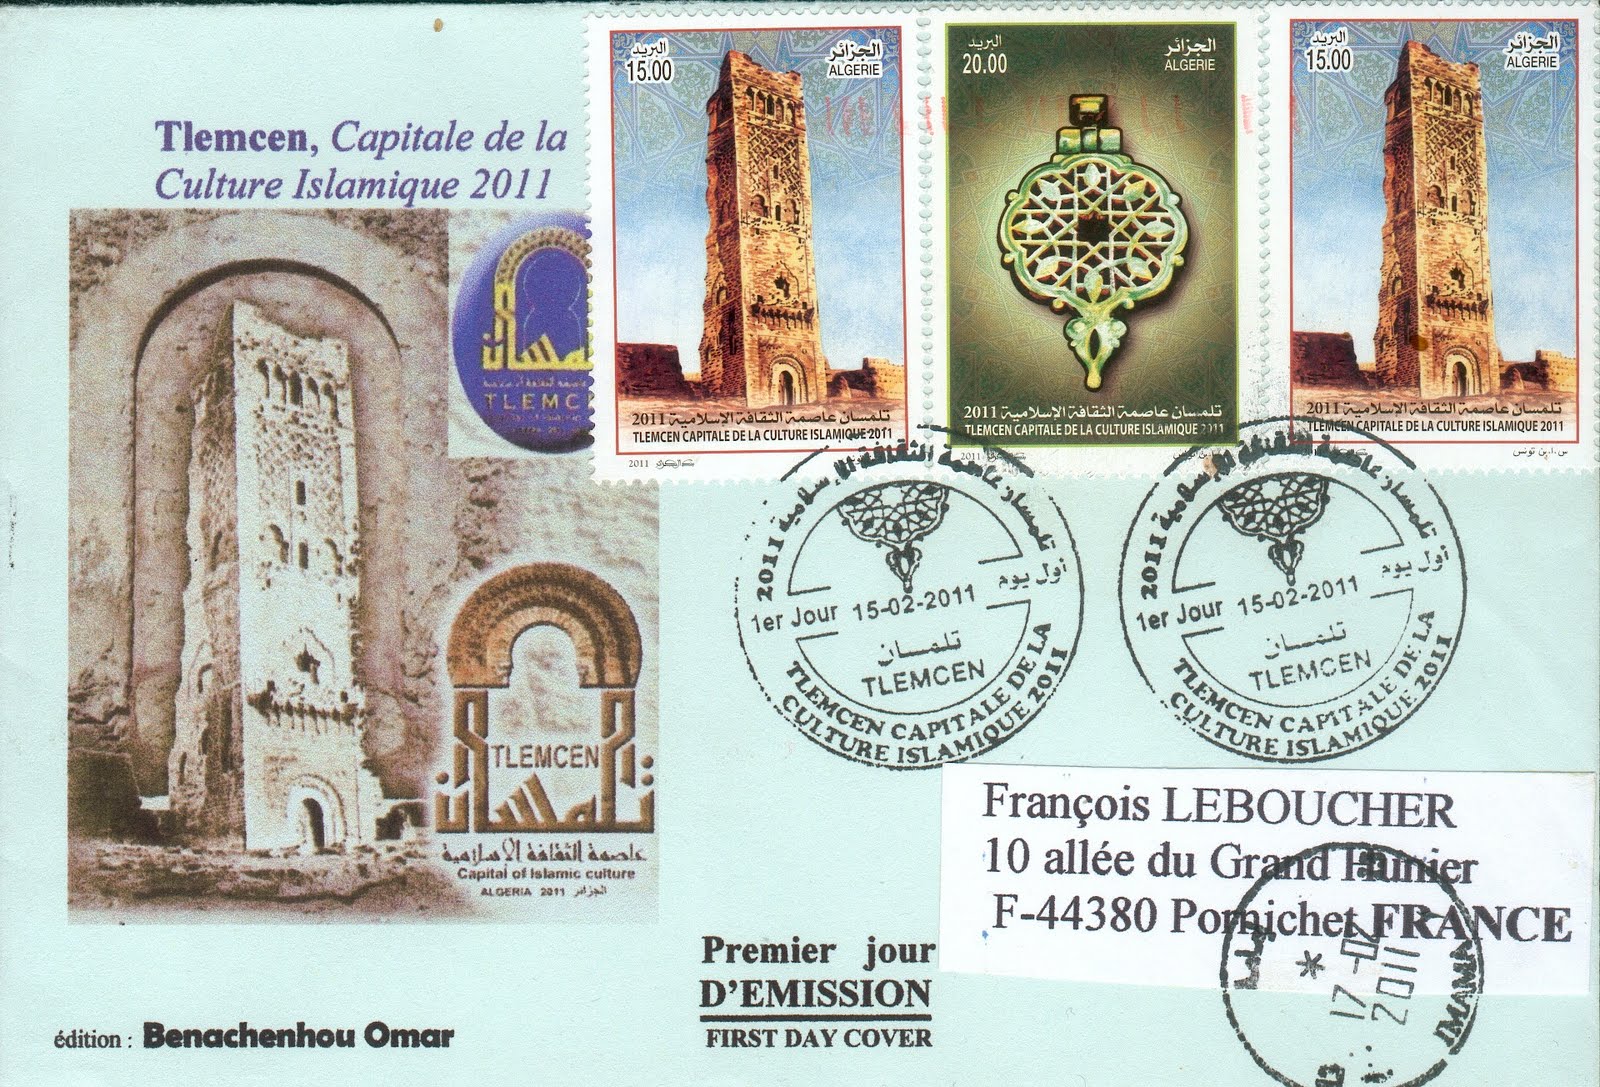 Covers and stamps of the World Tlemcen  Alg rie 